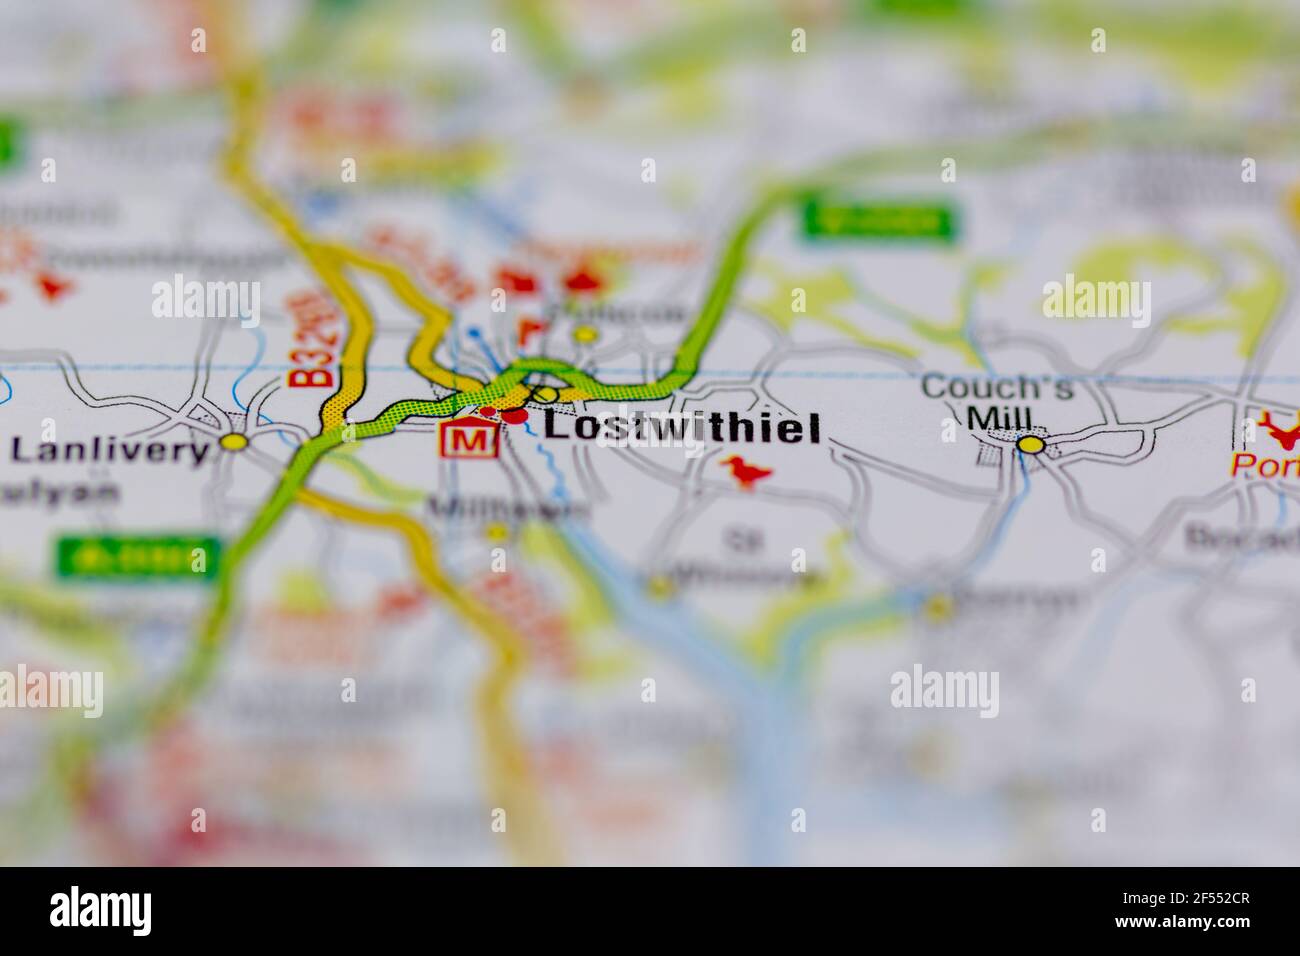 Lostwithiel Shown on a Geography map or road map Stock Photo